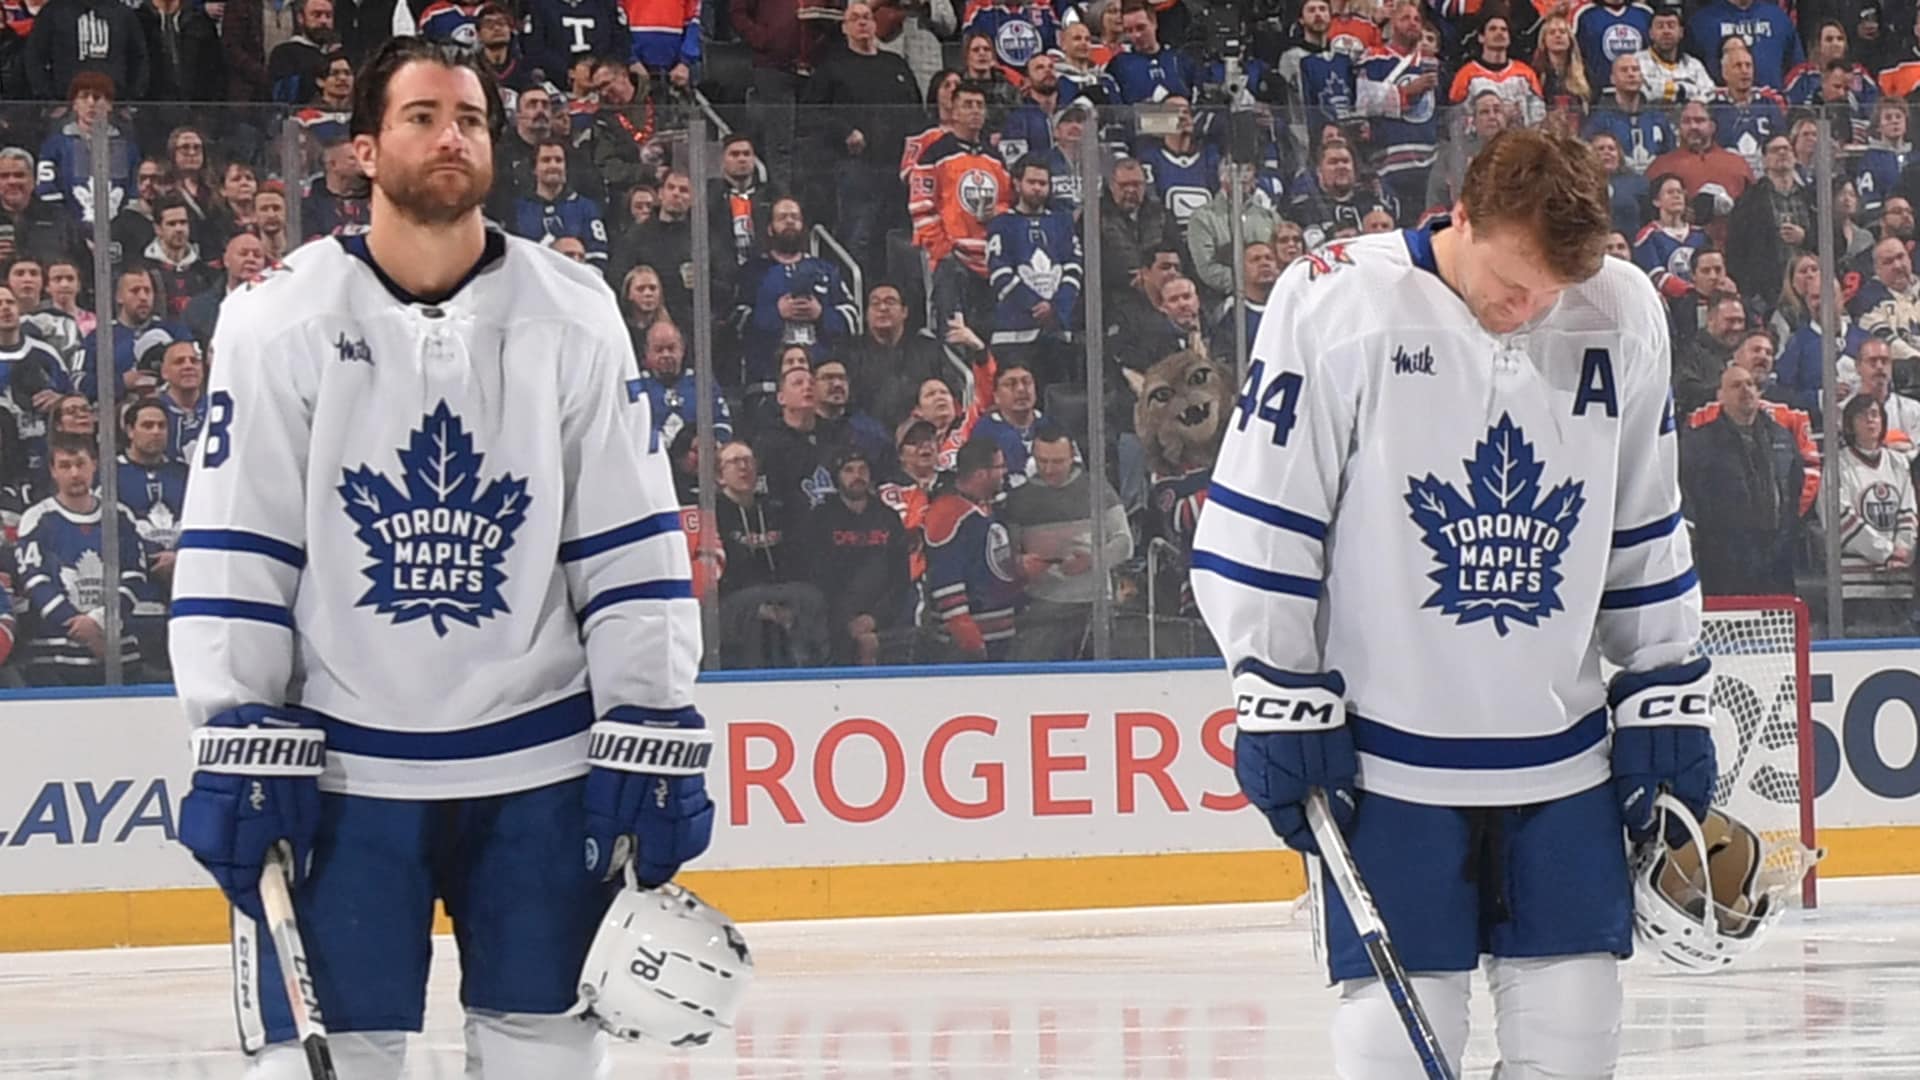 Maple Leafs' Keefe, Sabres' Granato fined $25k each for bench